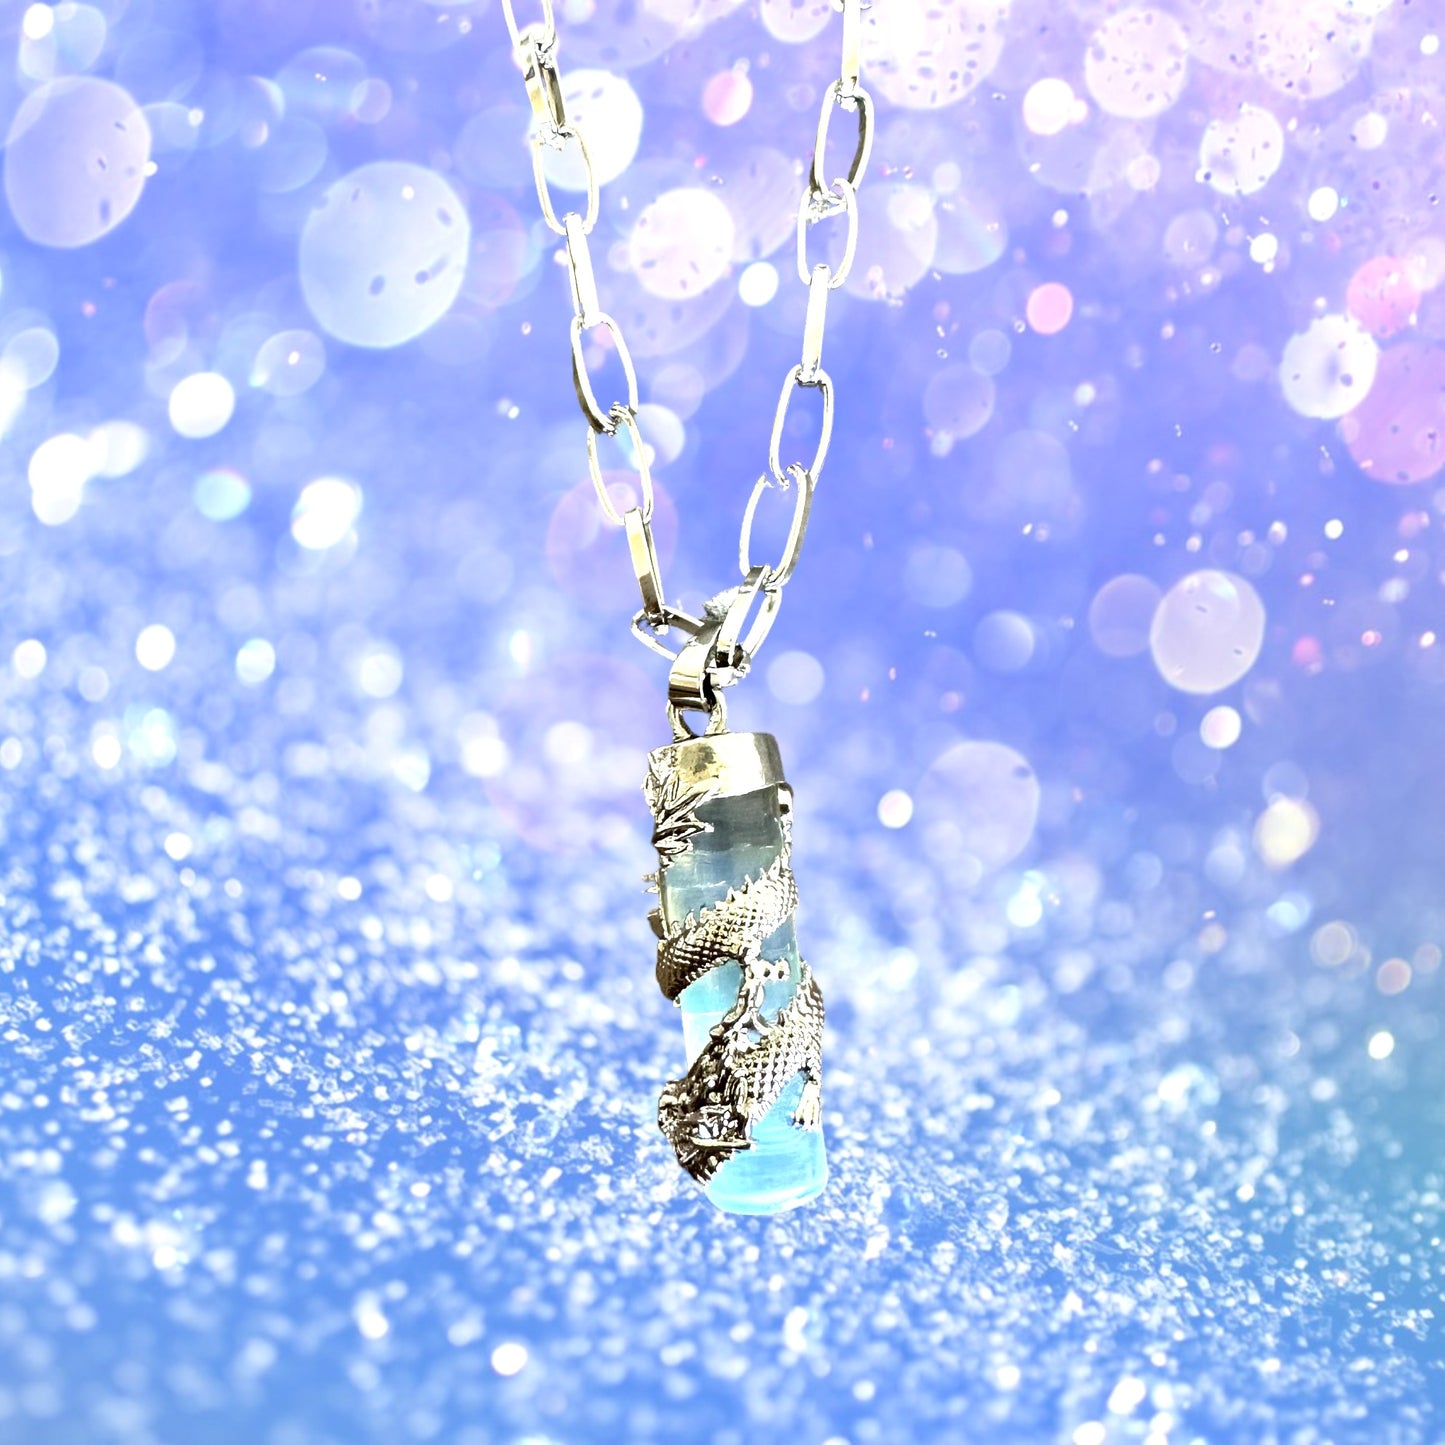 Cylindric Dragon Wrapped Opalite Pendant Necklace